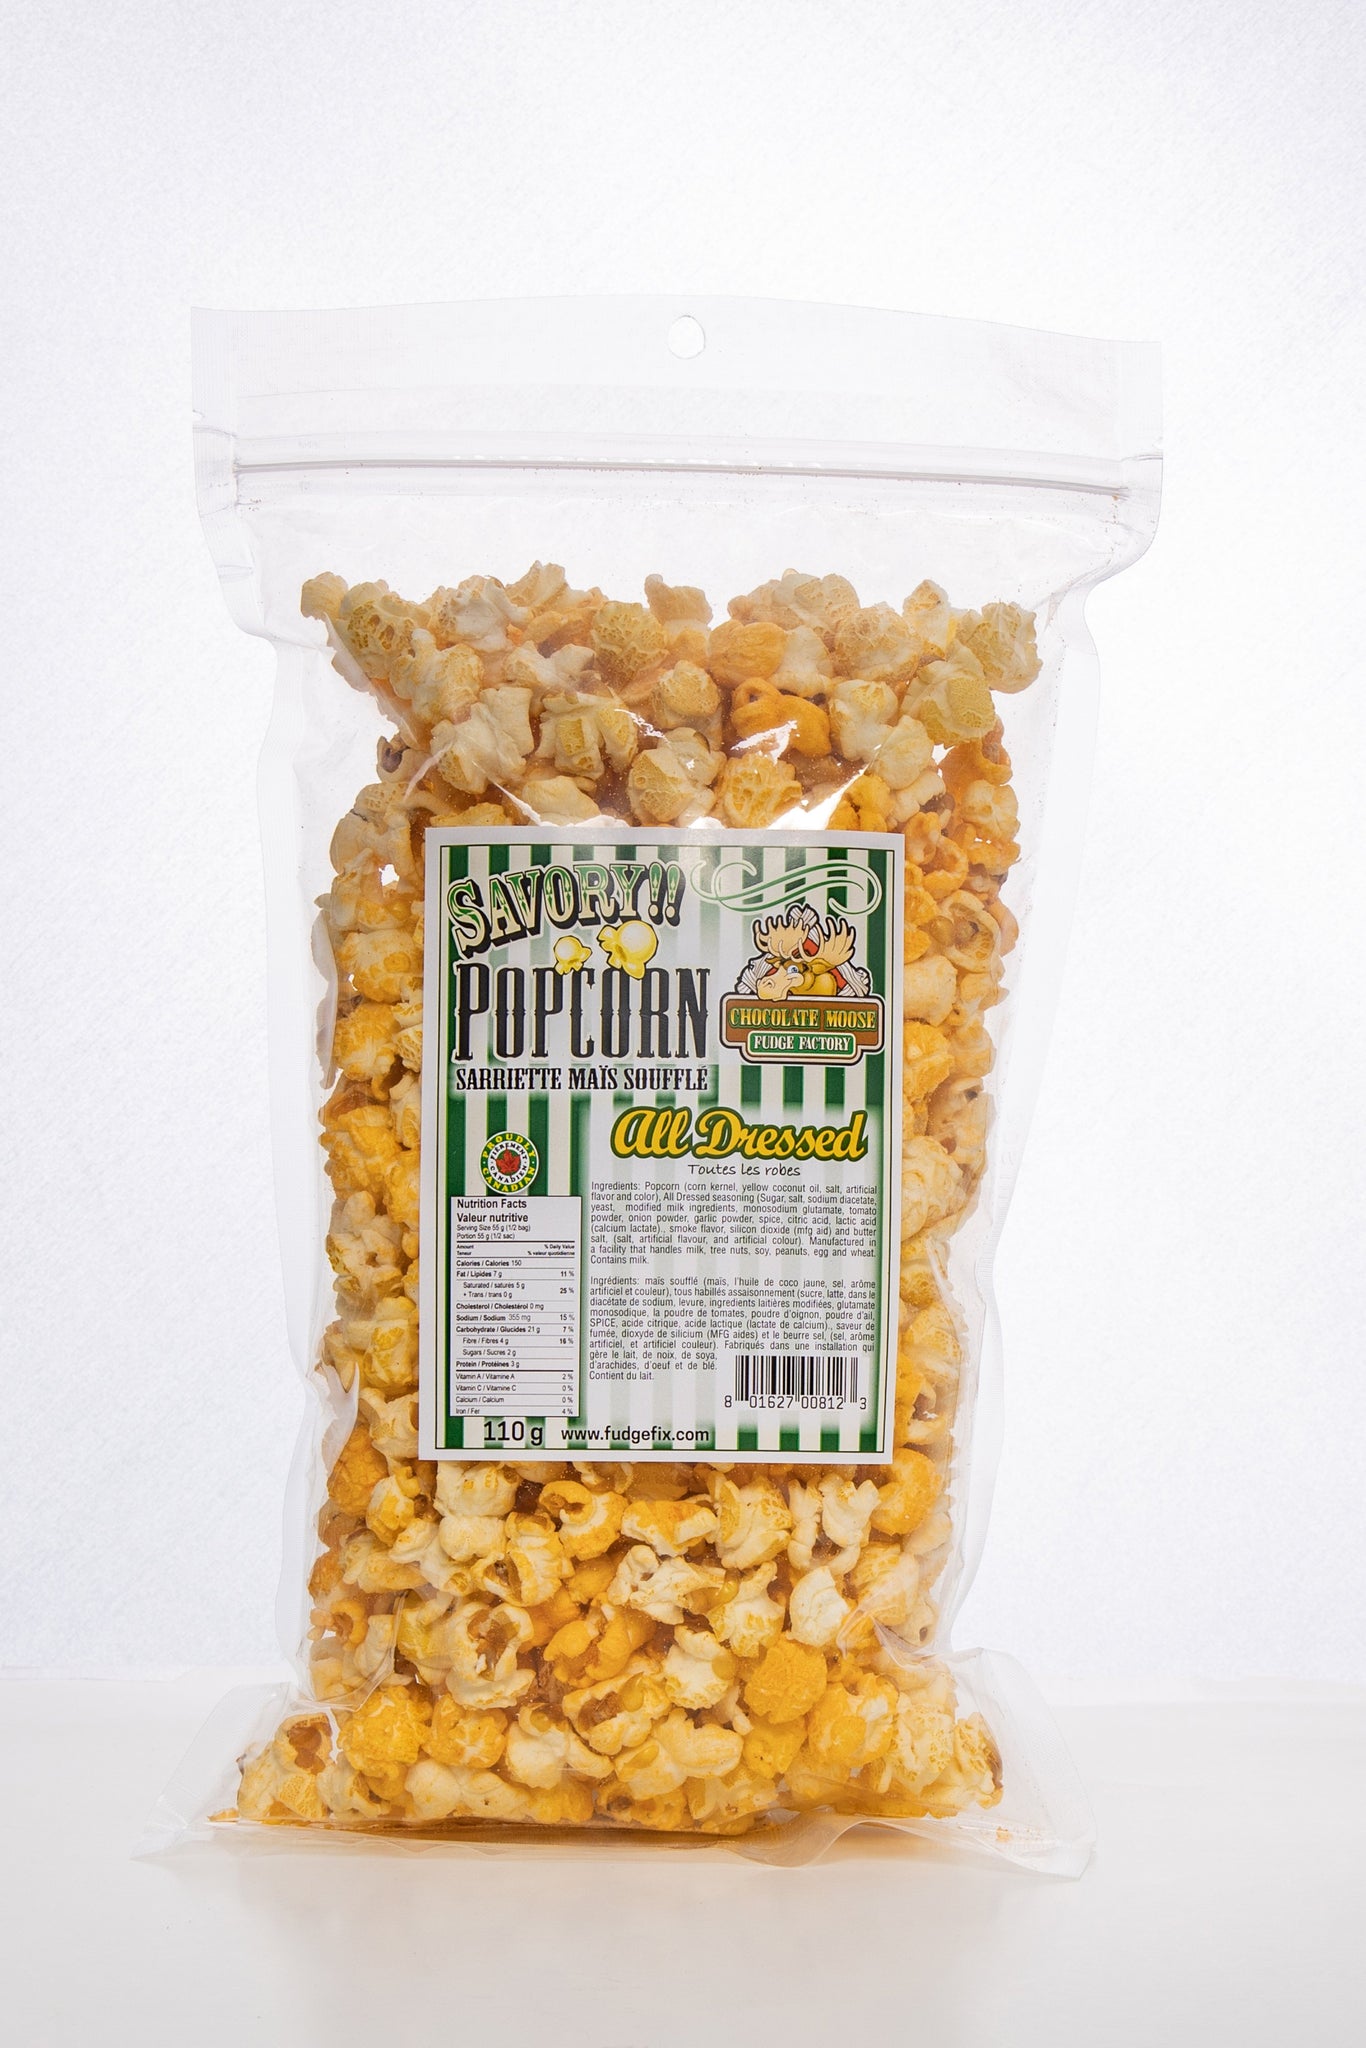 All Dressed - Savory Popcorn Set of 6 bags per flavor